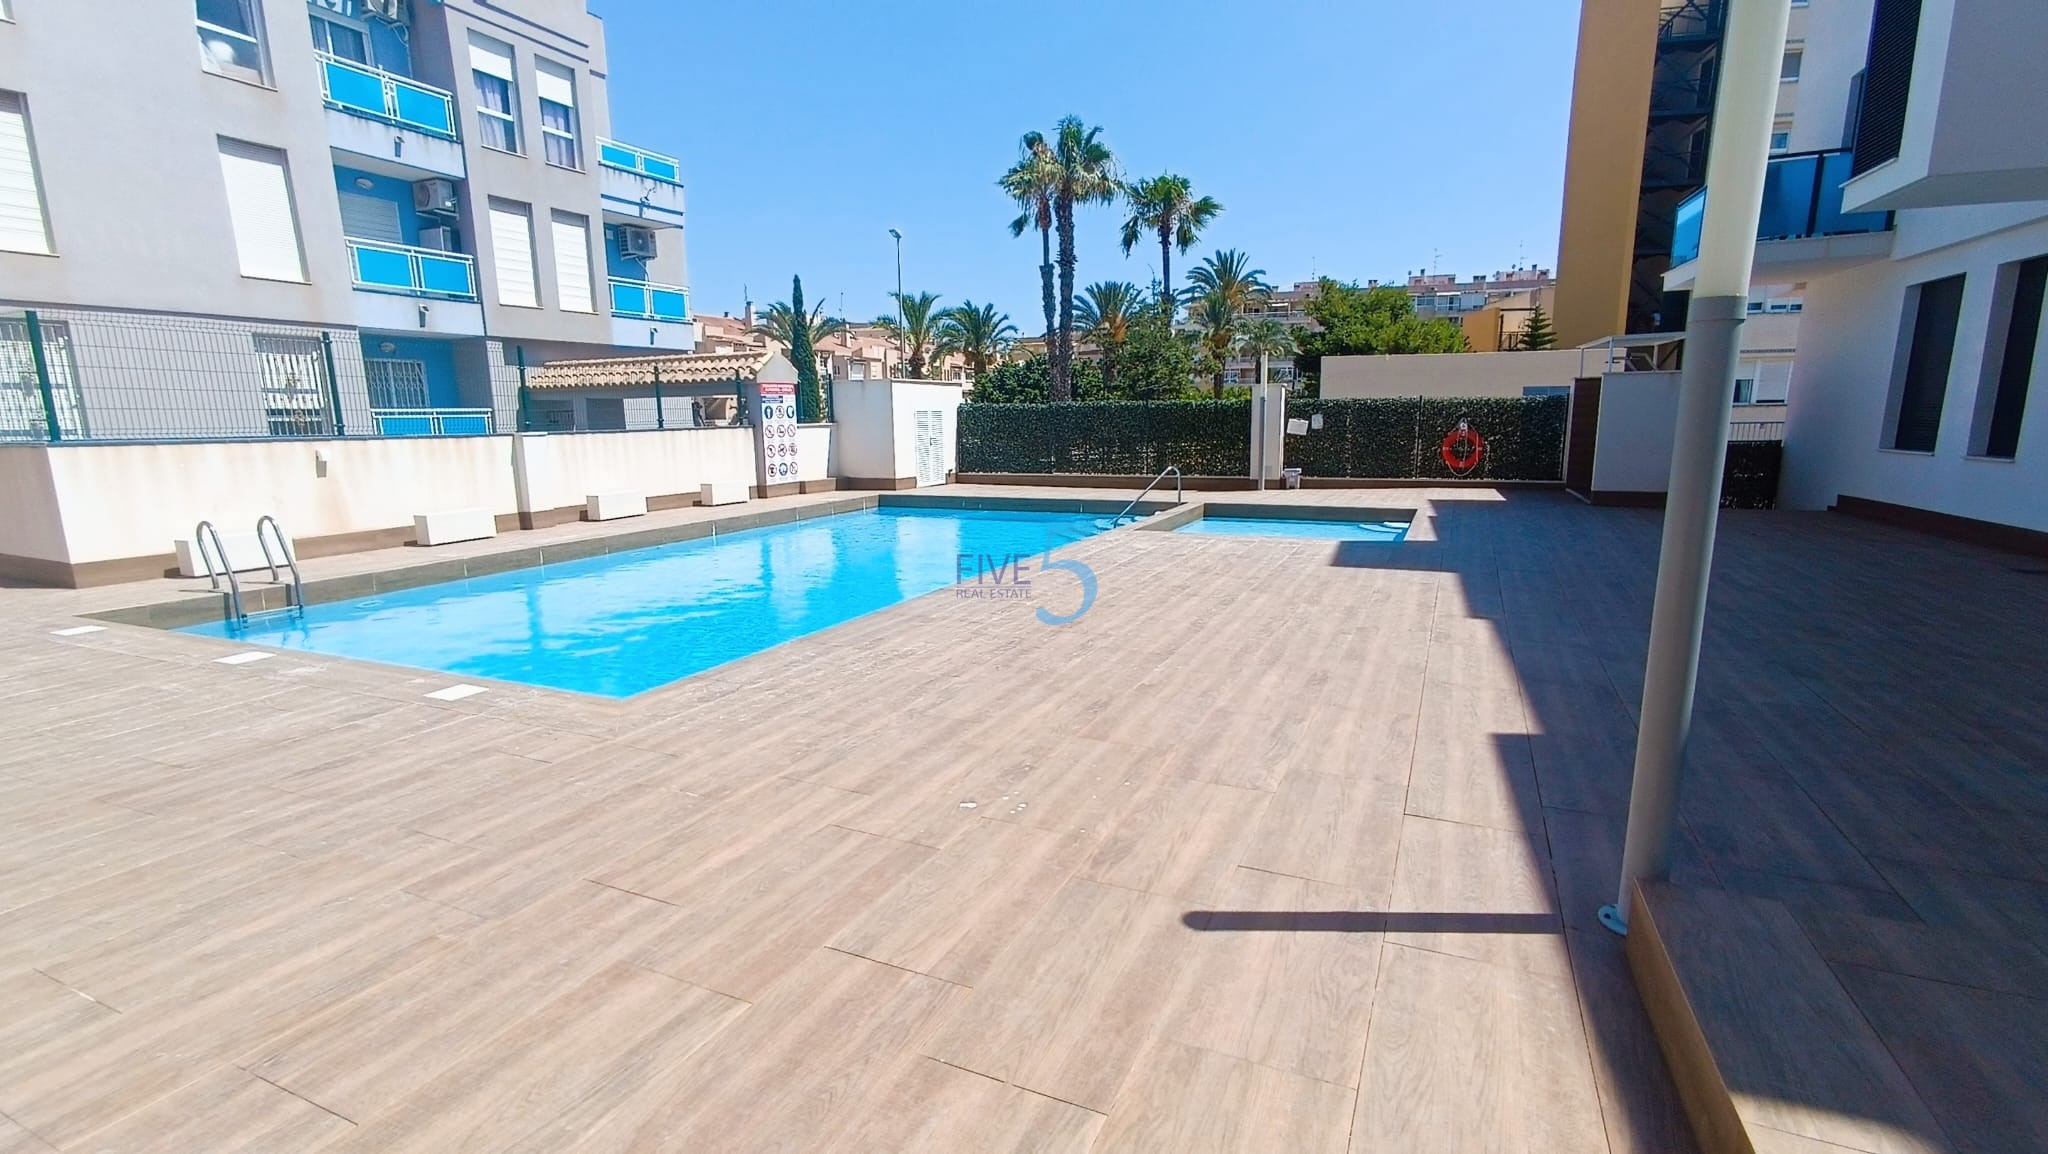 Property Image 582231-torrevieja-apartment-1-1